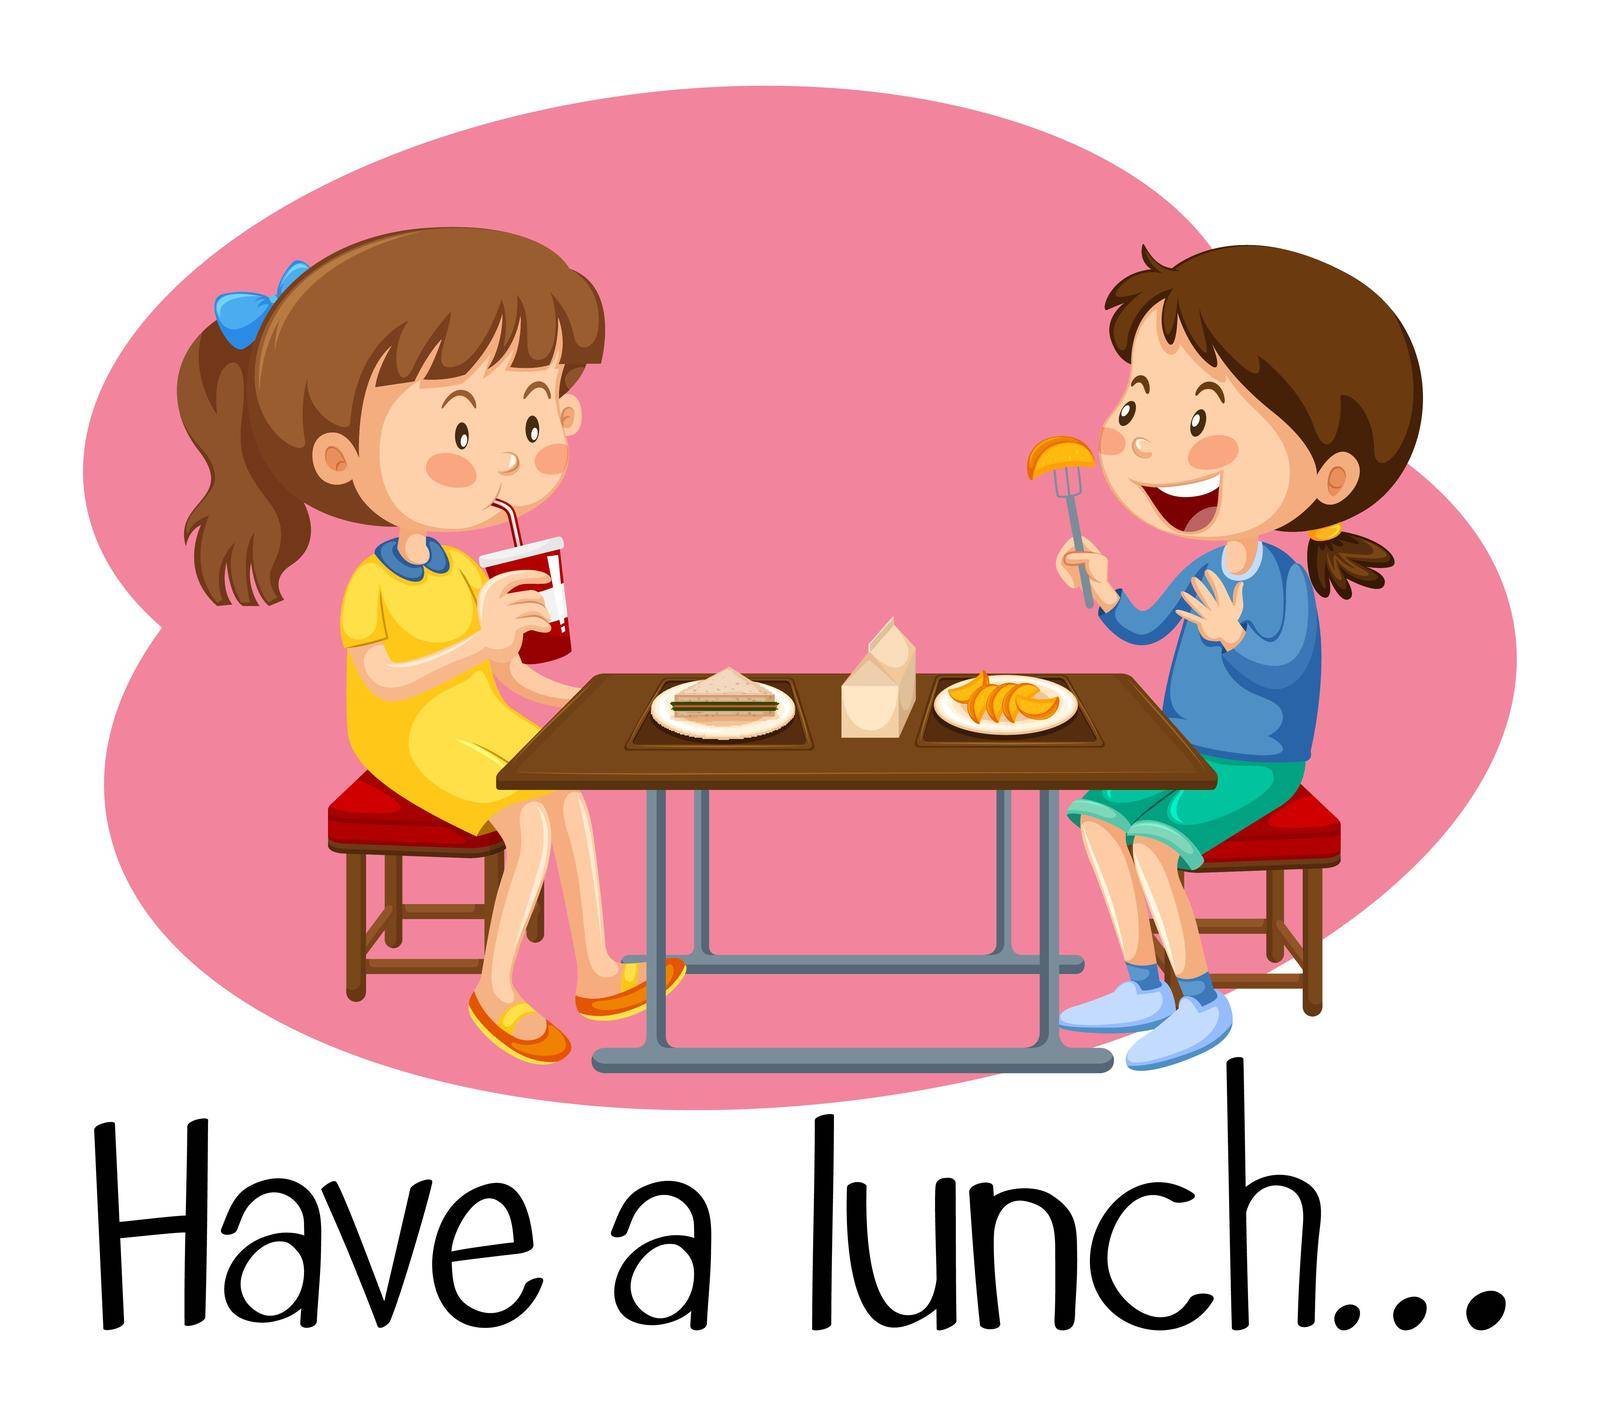 Girls Having Lunch at Cafeteria illustration